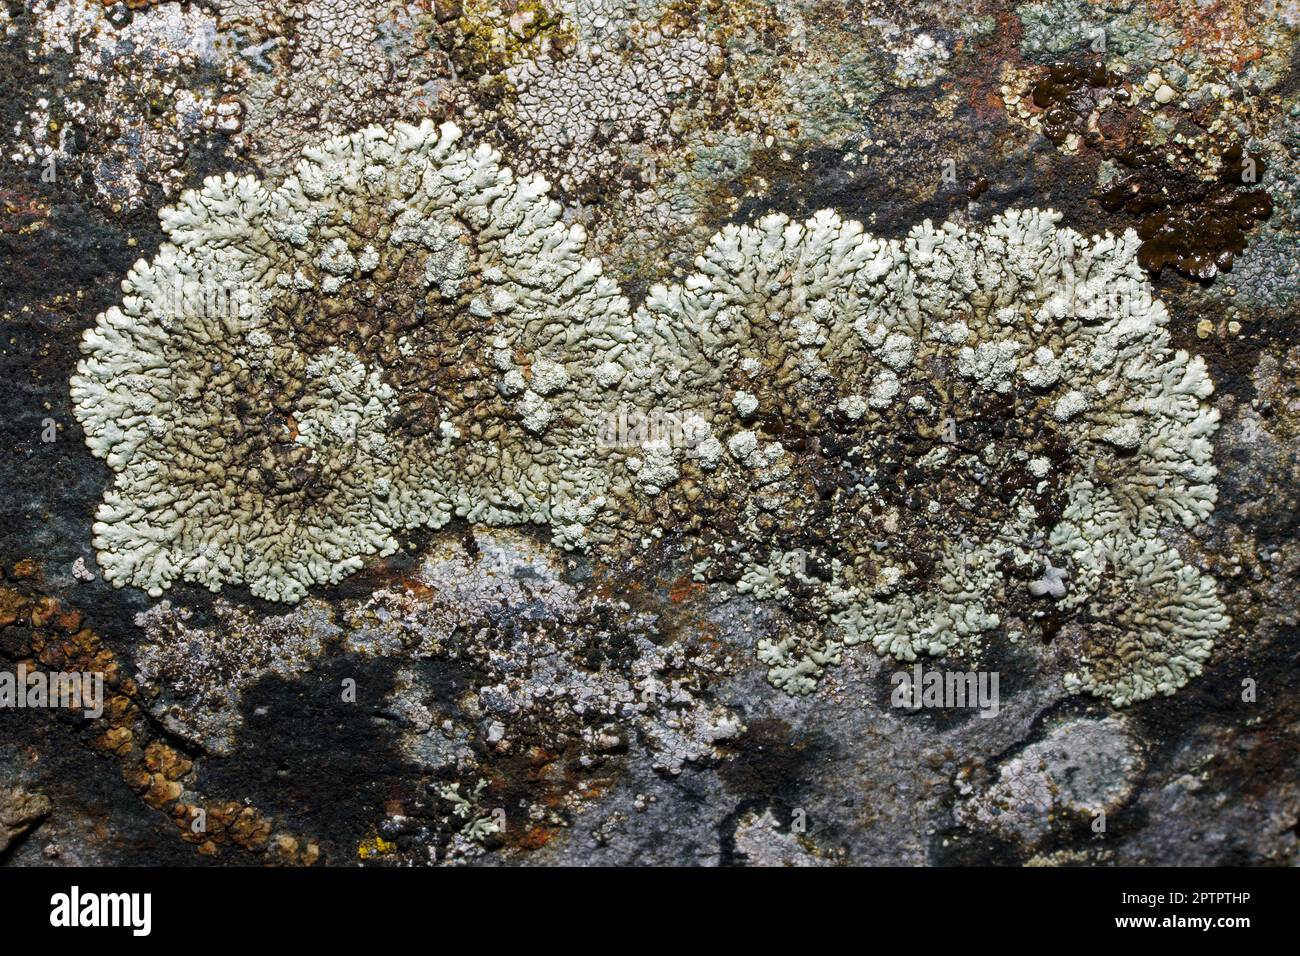 Xanthoparmelia mougeotii is a foliose lichen found on well-lit siliceous rocks. It has a global distribution in temperate and upland areas. Stock Photo